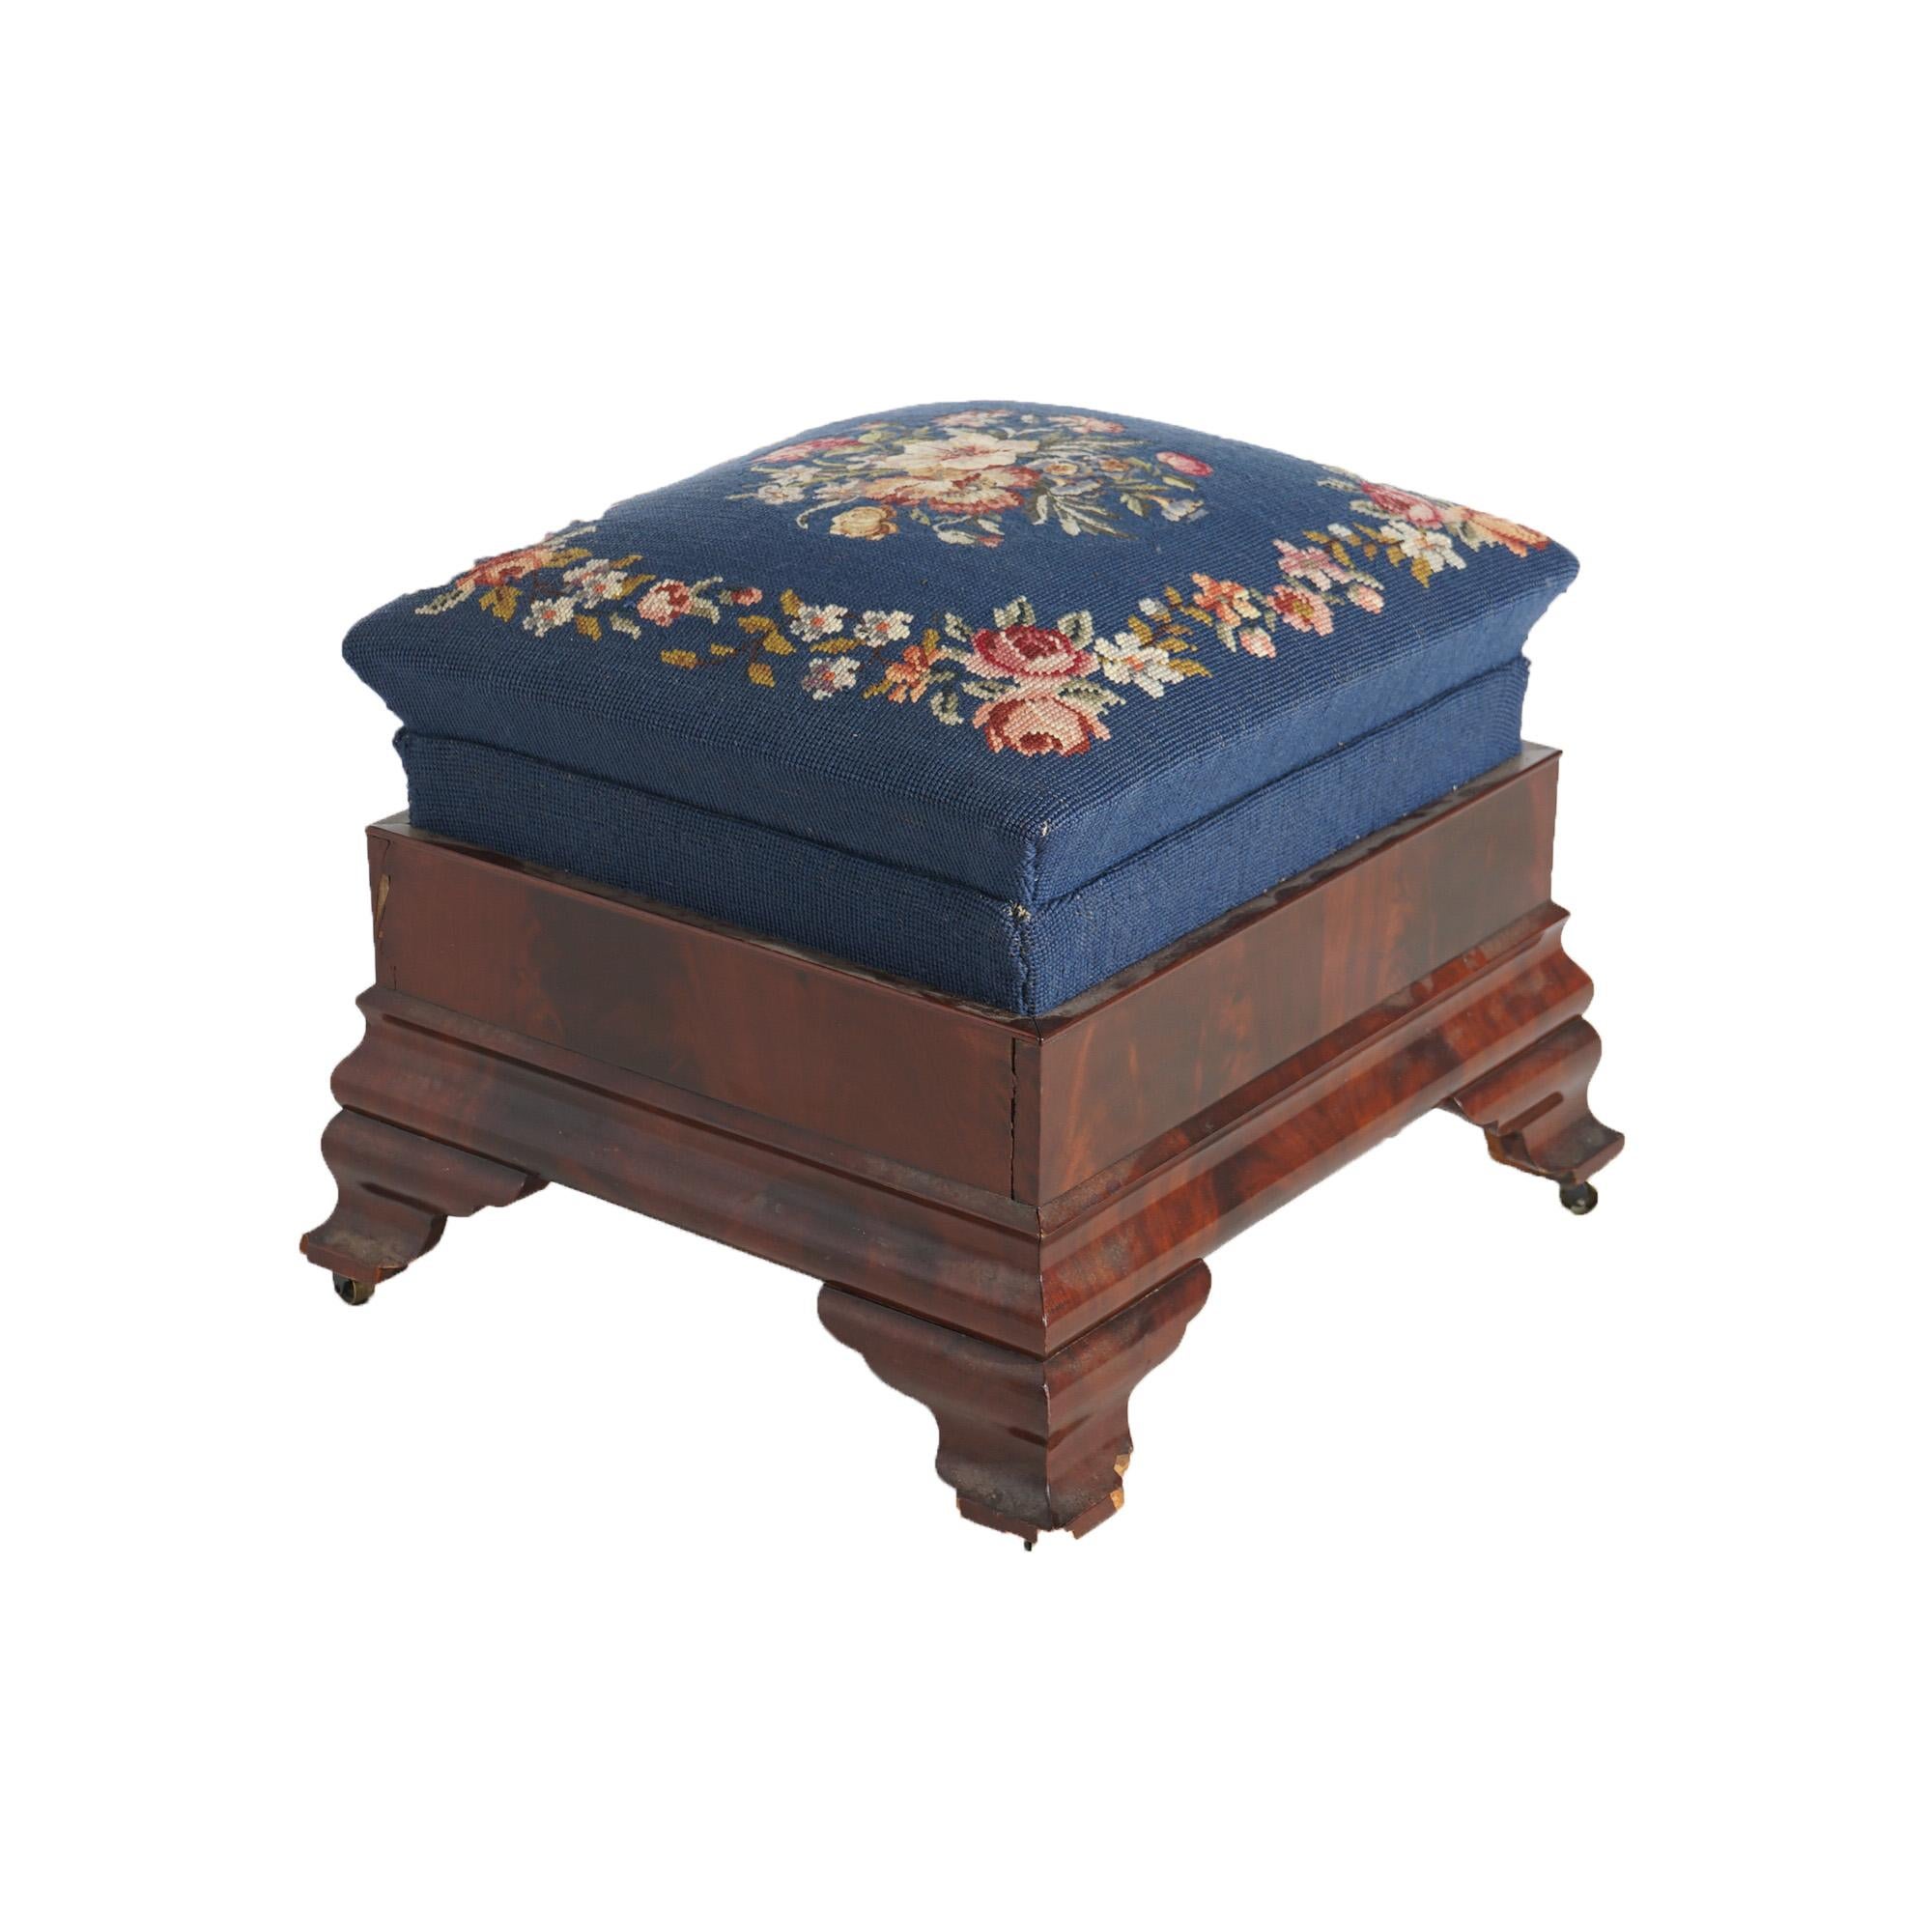 Antique American Empire Classical Greco Flame Mahogany Needlepoint Stool 19thC For Sale 1